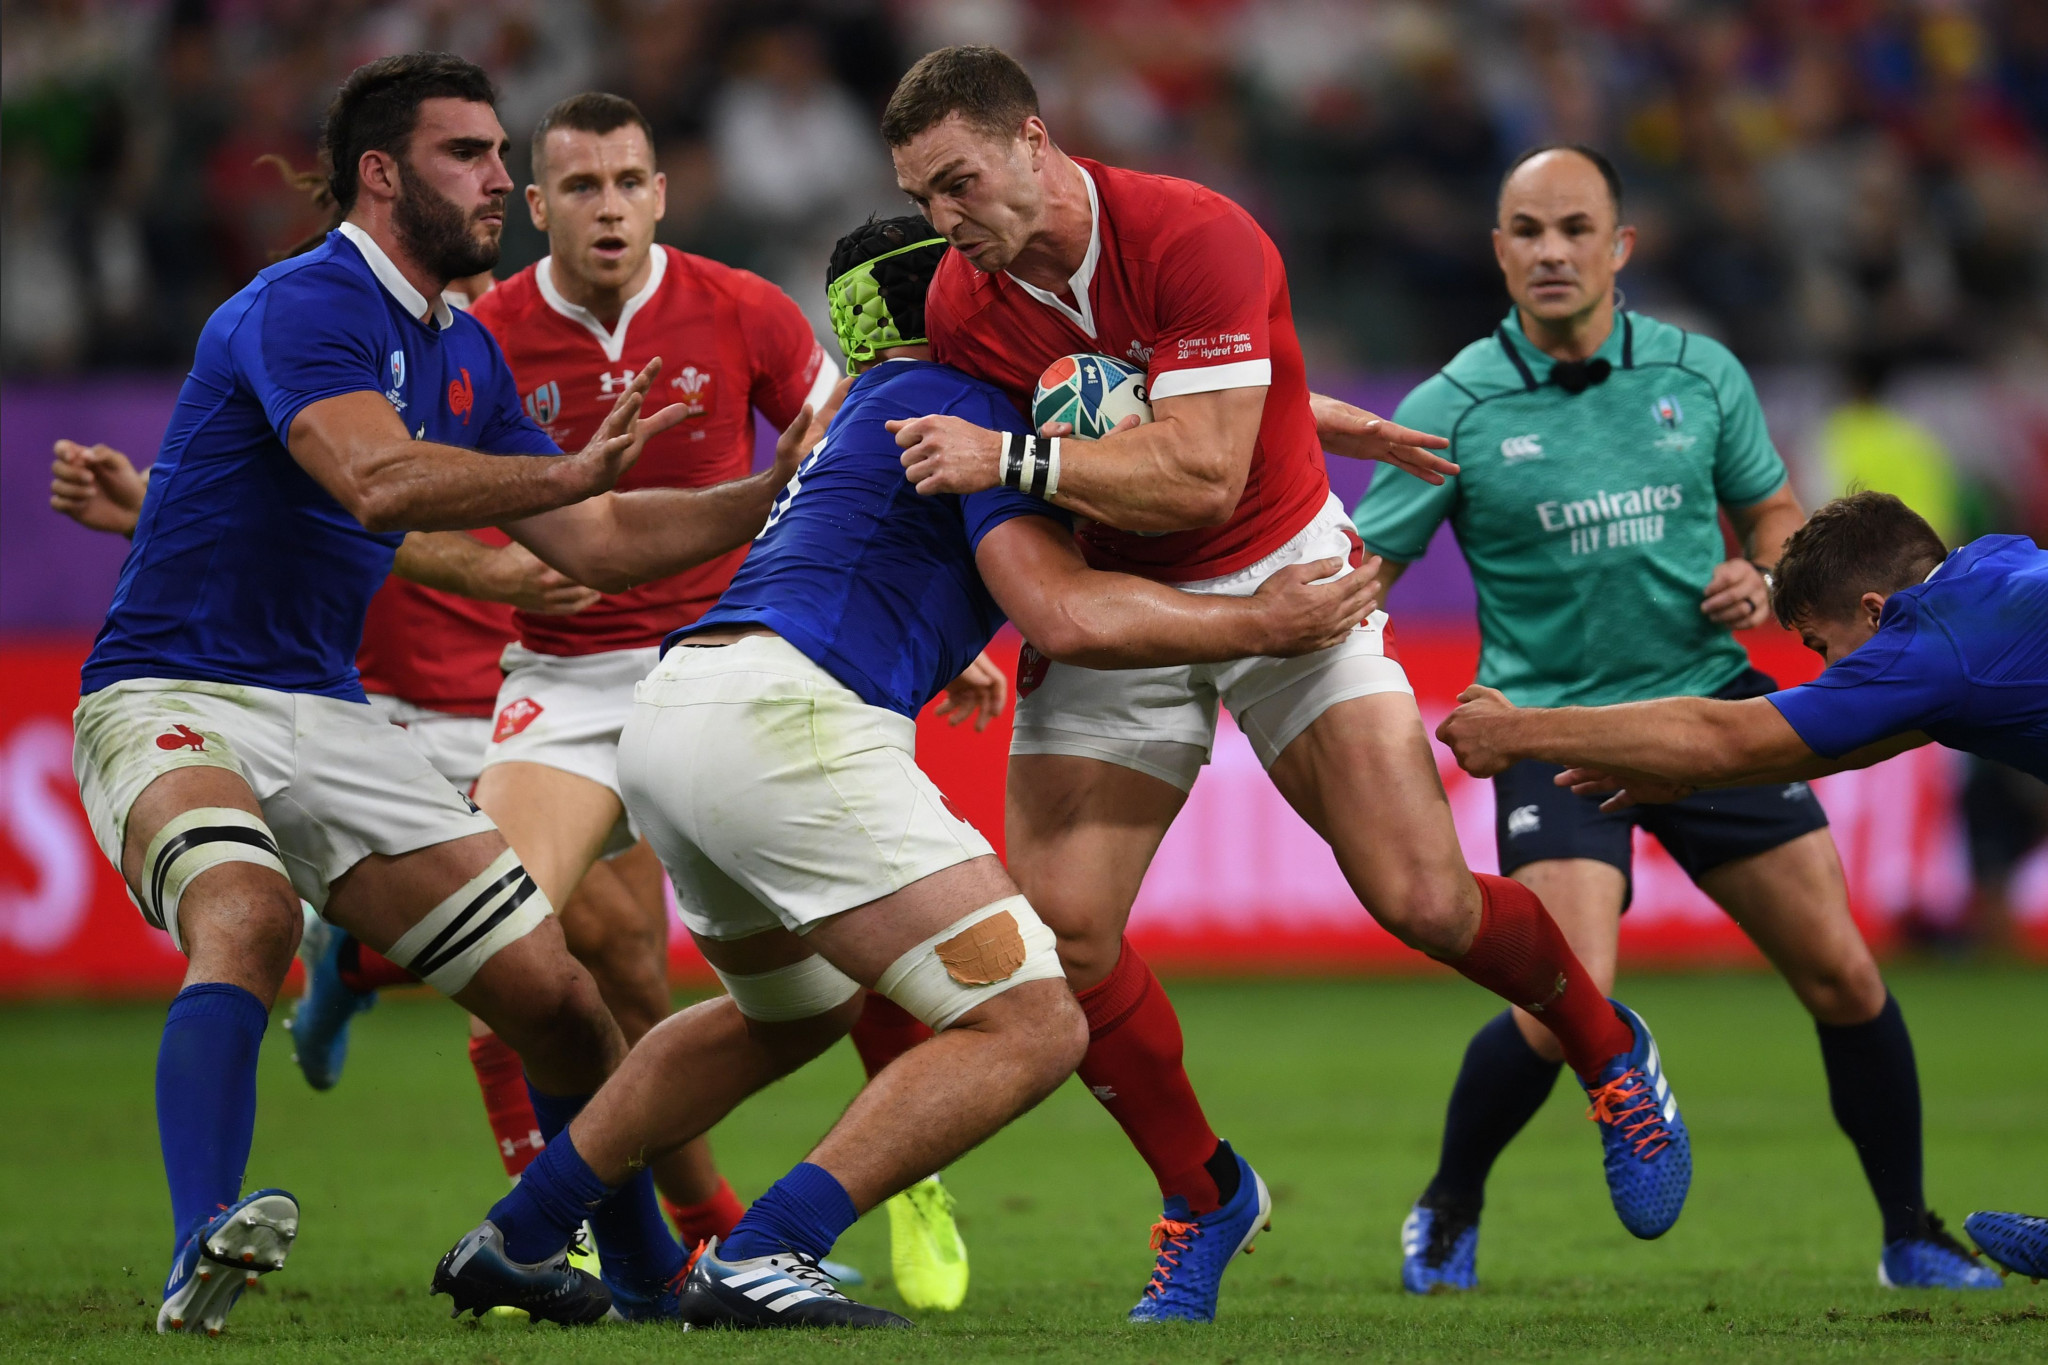 Wales narrowly beat France to set up a semi-final clash with South Africa at the Rugby World Cup ©Getty Images